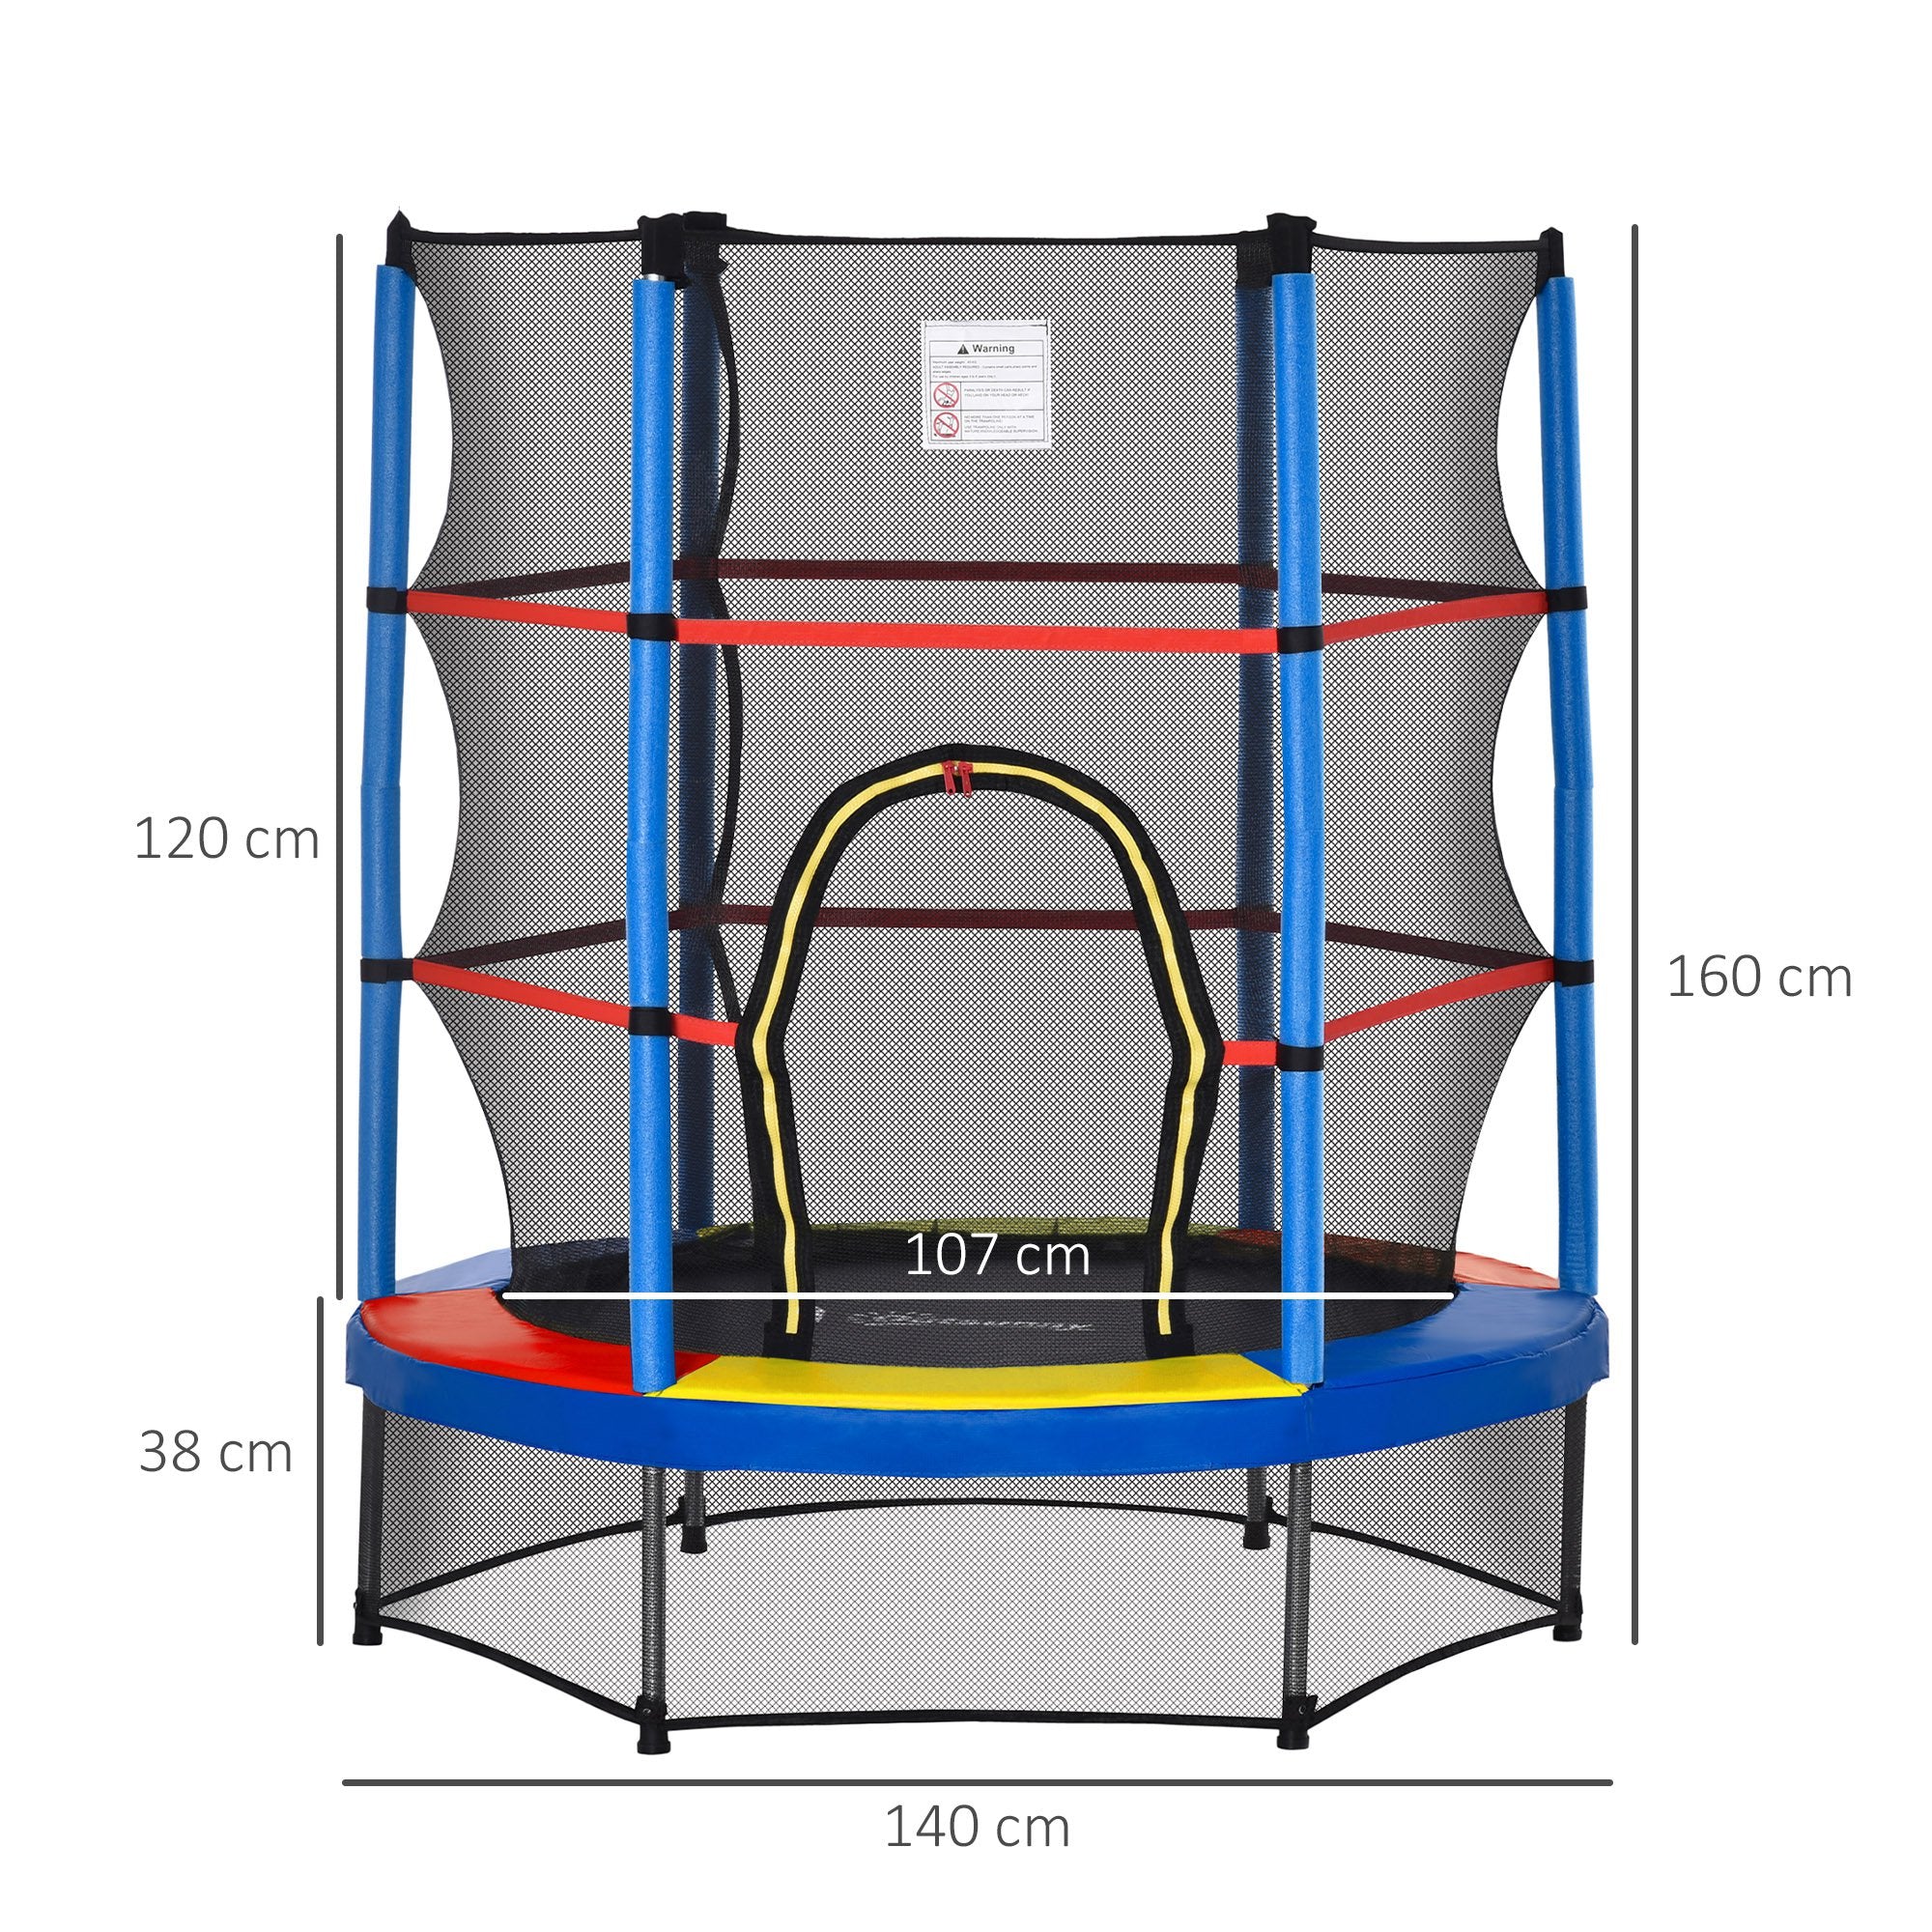 HOMCOM 5.2FT/63 Inch Kids Trampoline with Enclosure Net Steel Frame Indoor Round Bouncer Rebounder Age 3 to 6 Years Old Multi-color - Inspirely